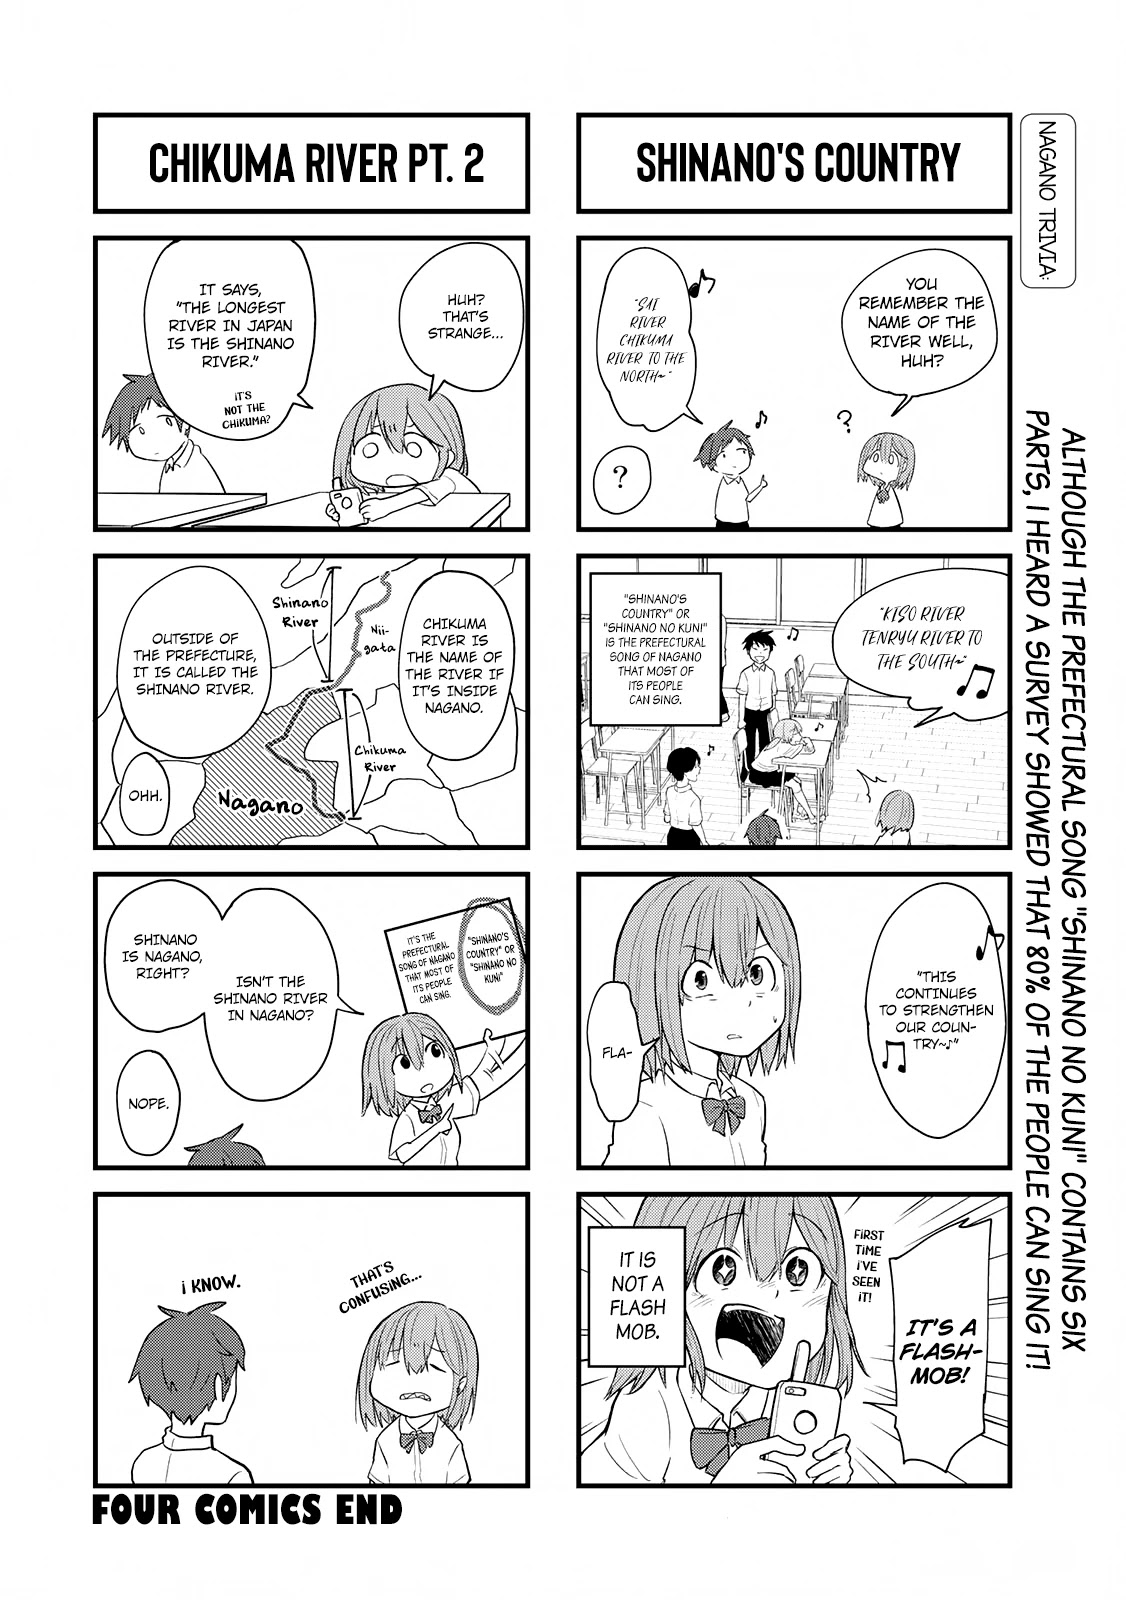 Hiyumi's Country Road Chapter 3 #25